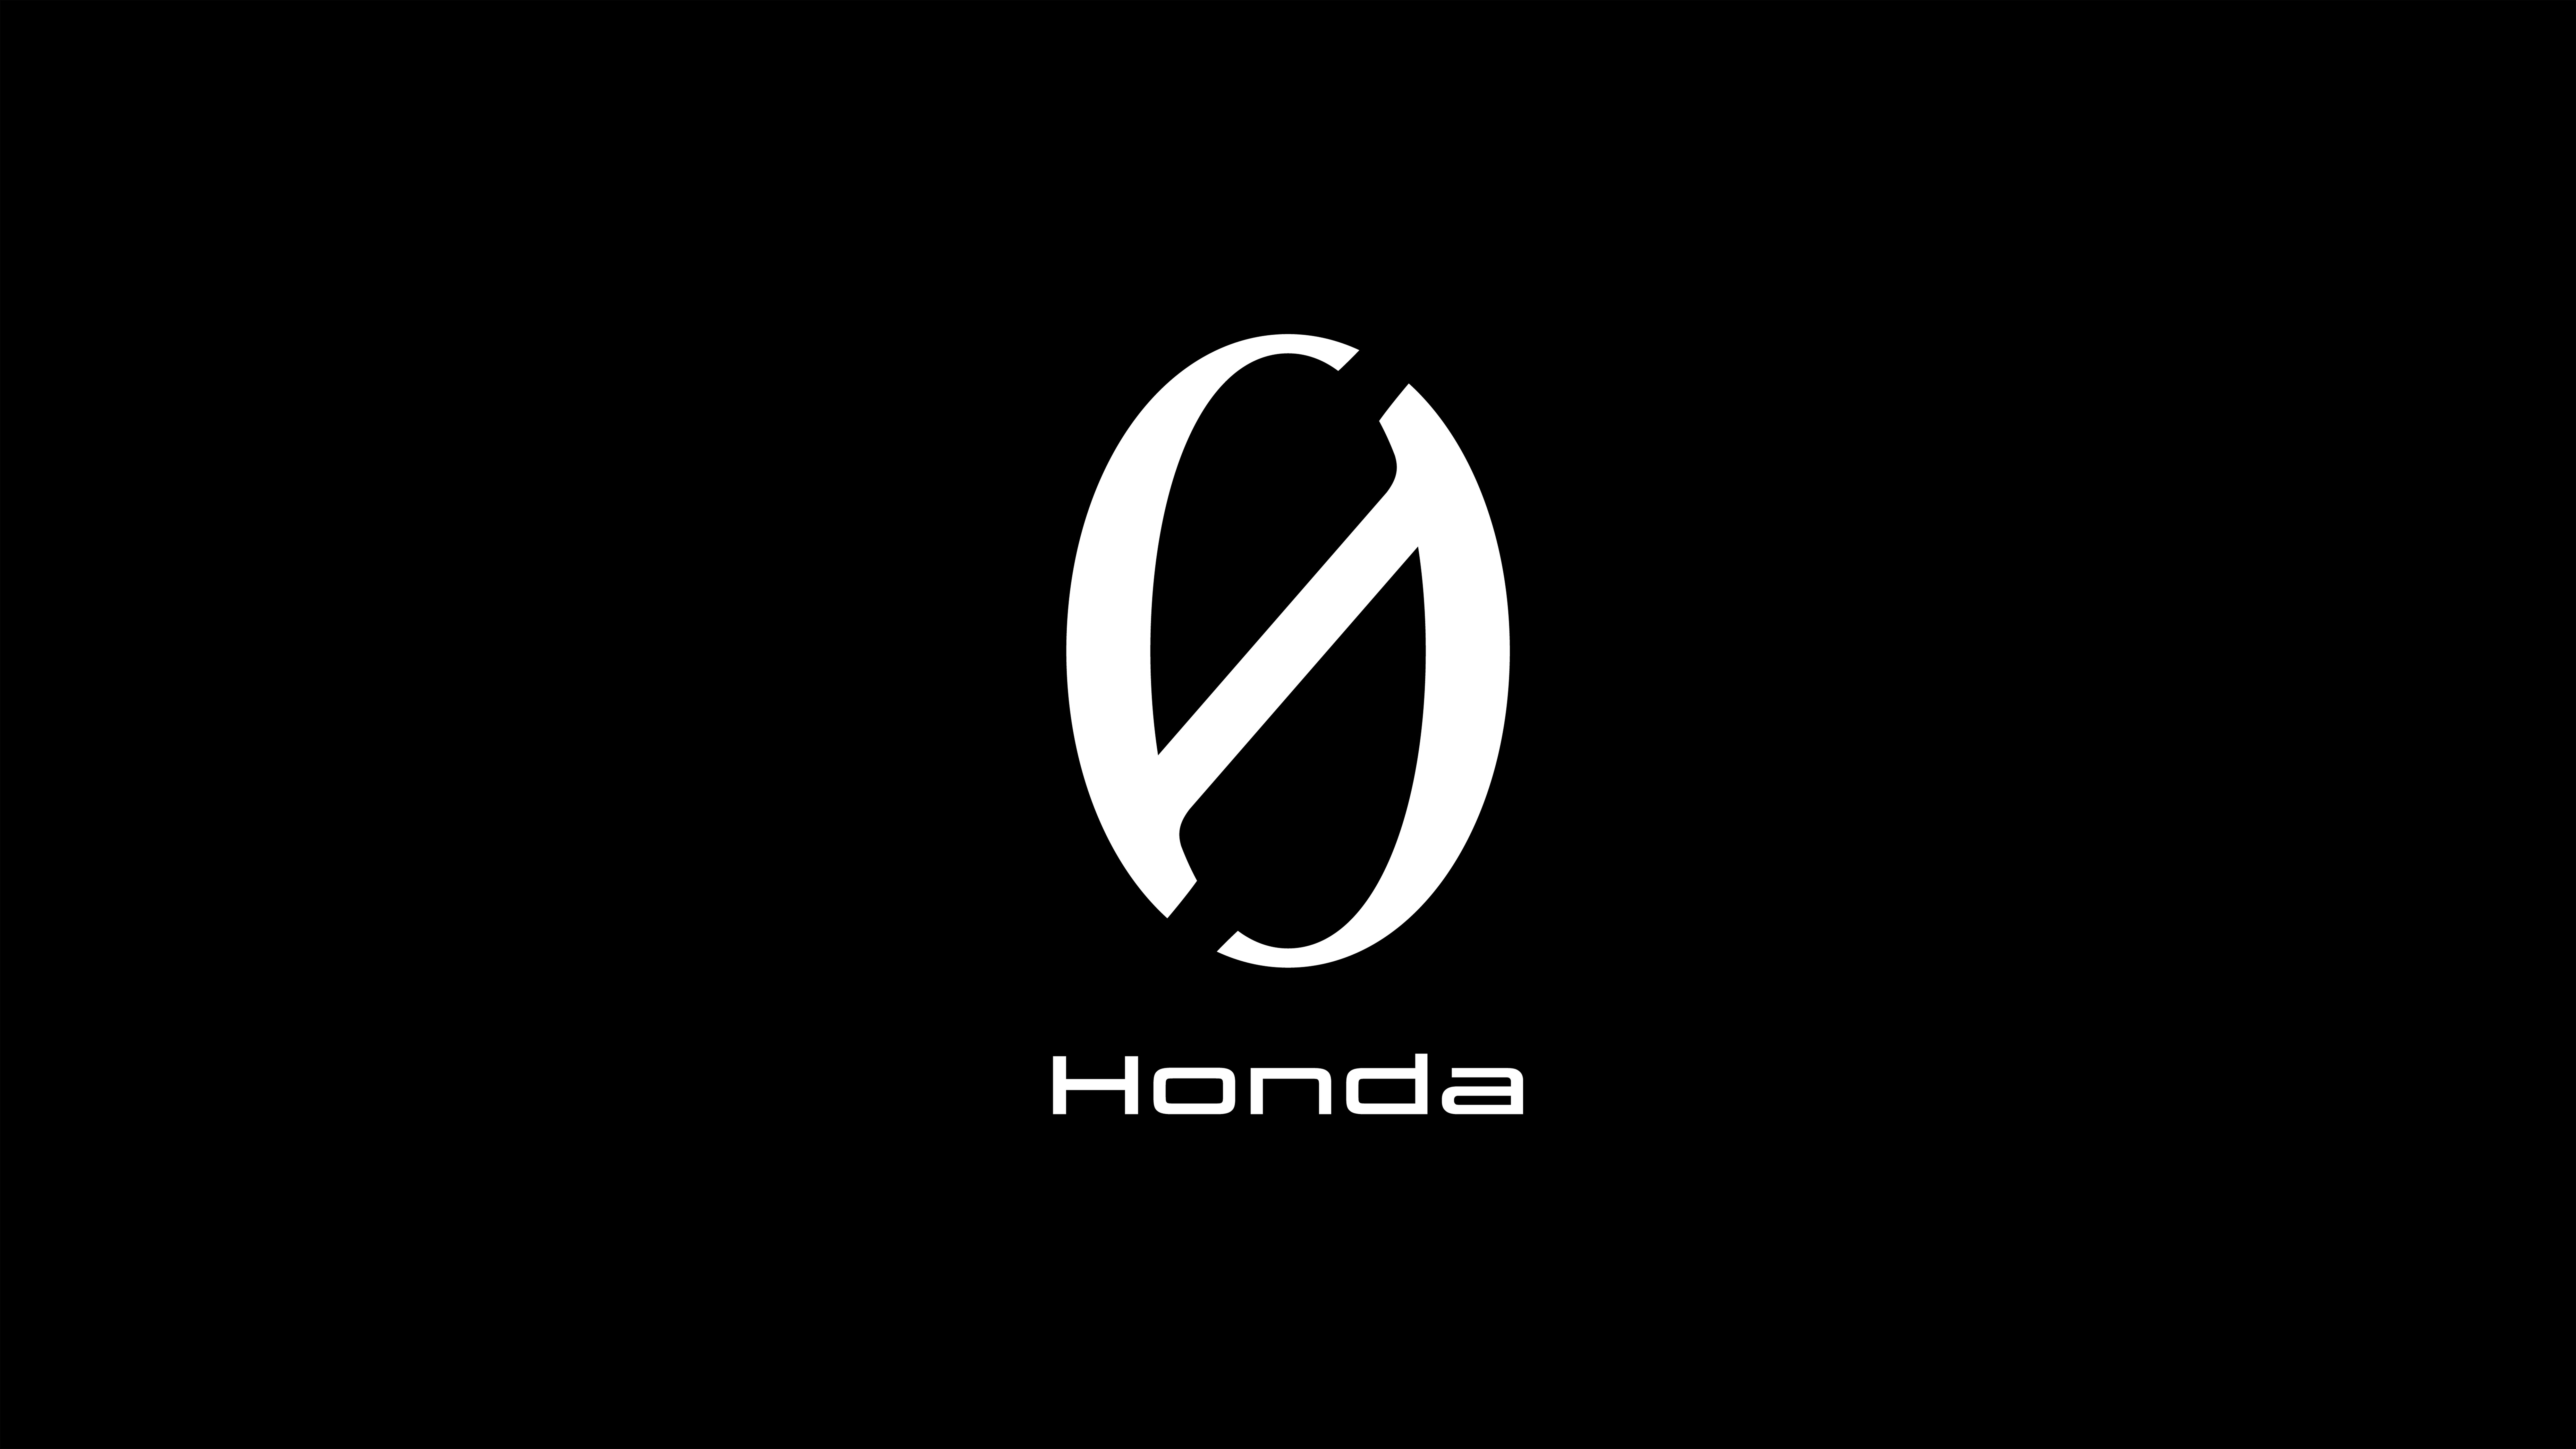 Honda's clever logo for its upcoming 0 Series EVs.